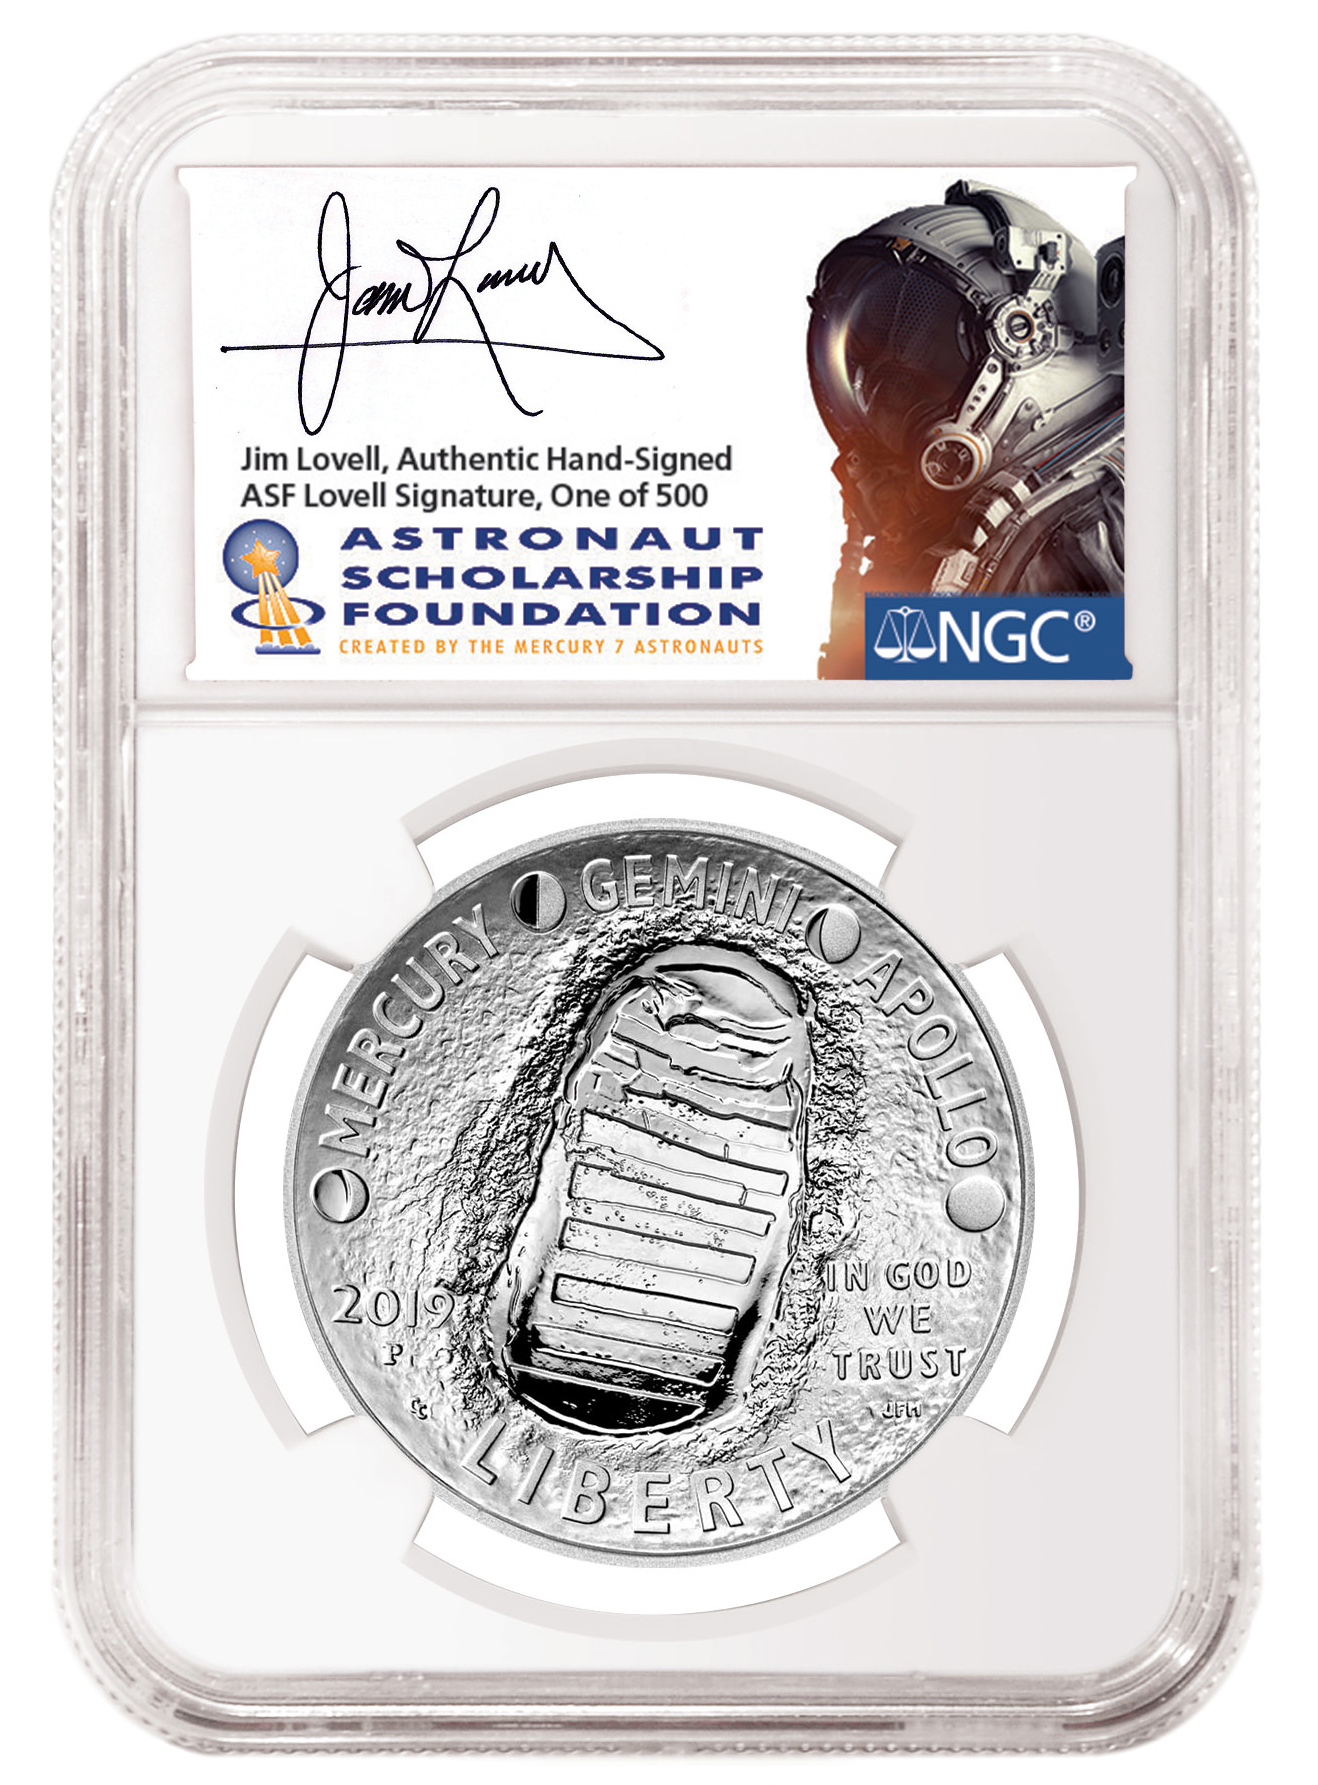 enlarged image for Press Release: NGC Launches Limited Edition Astronaut Autograph Labels